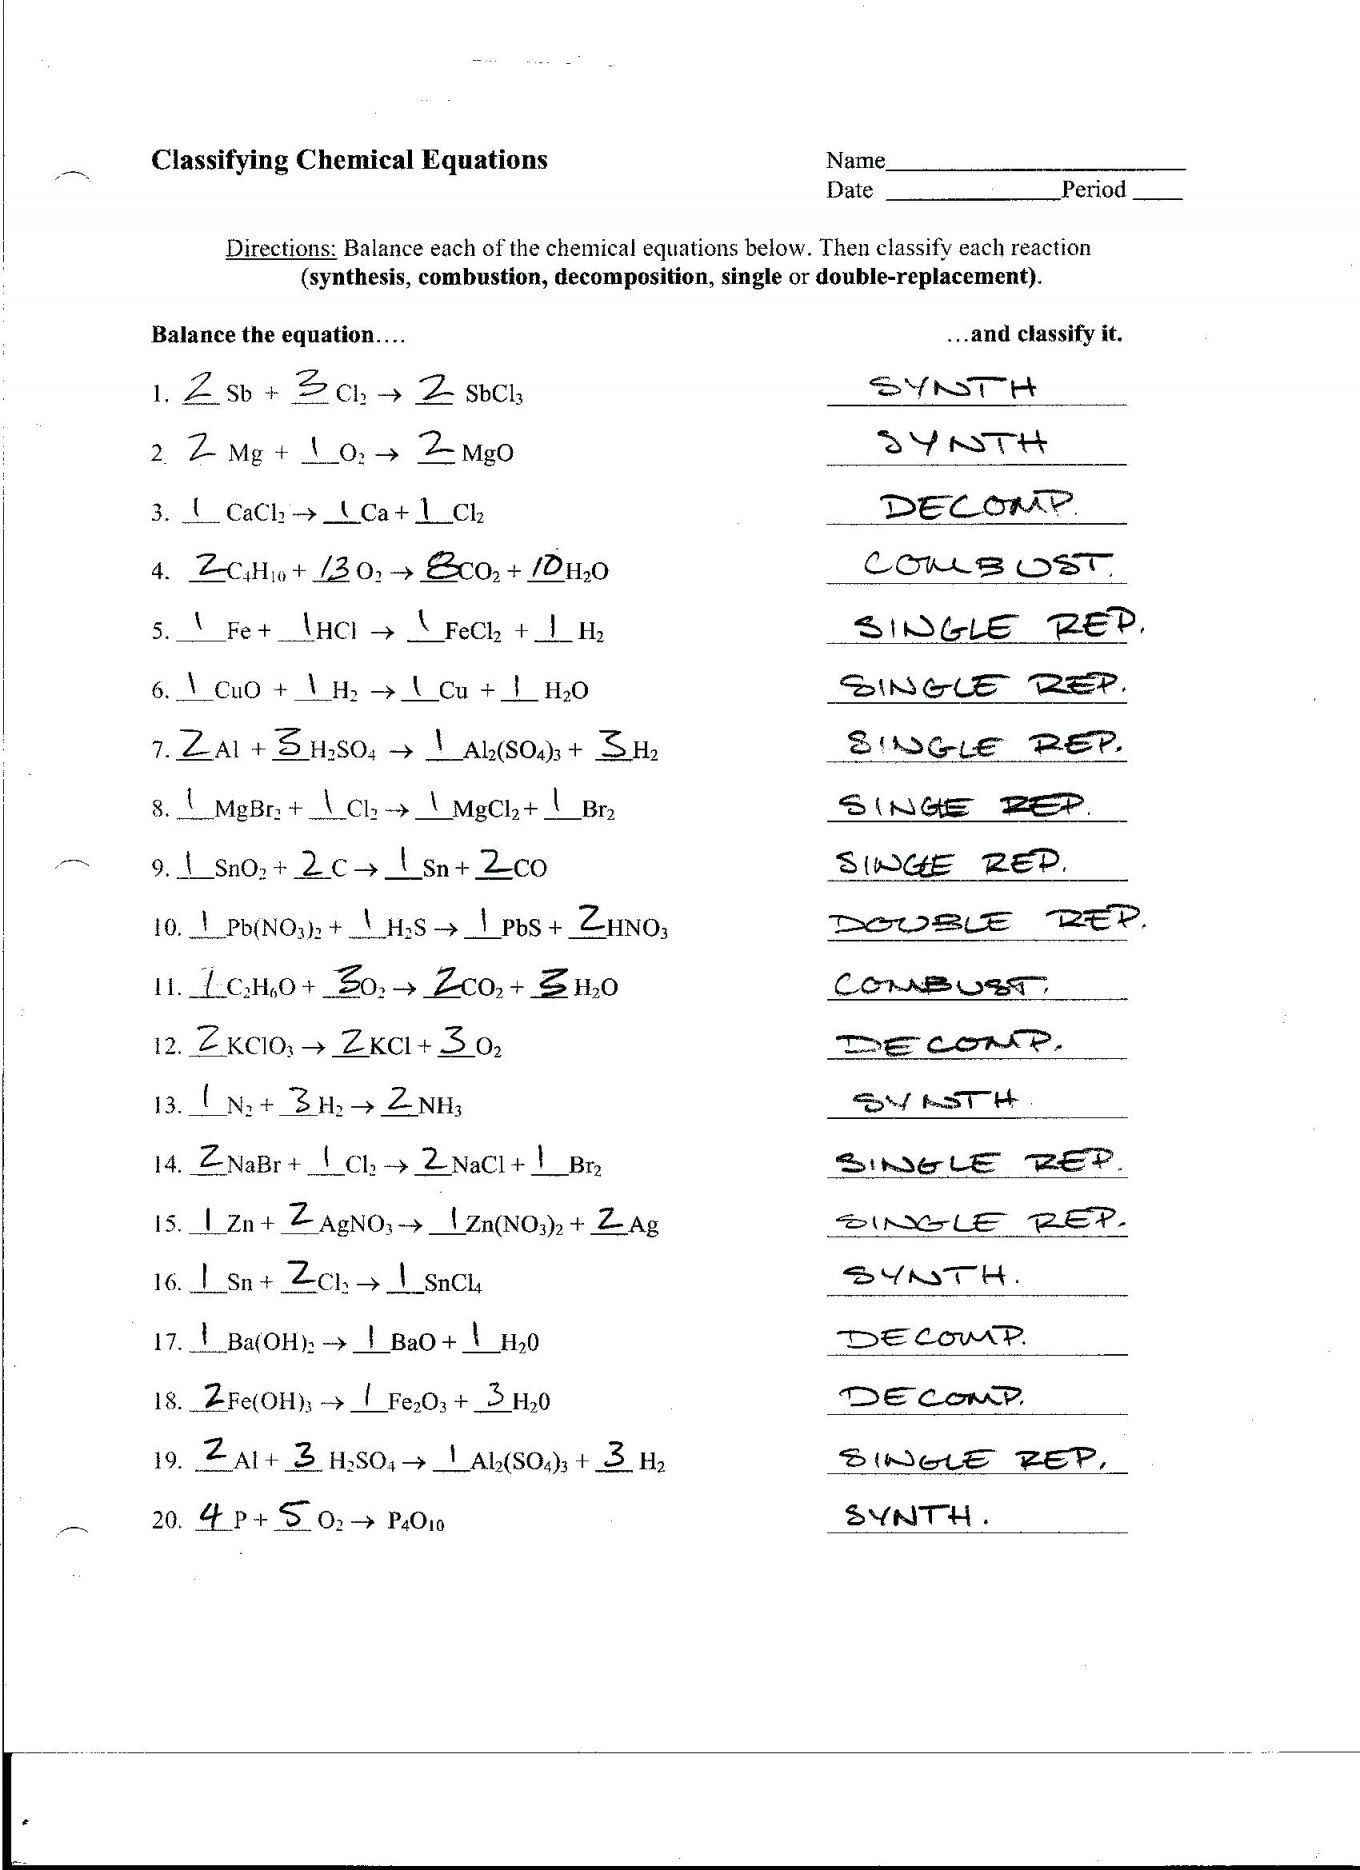 Classification Of Chemical Reactions Worksheet Classification Reactions Worksheet